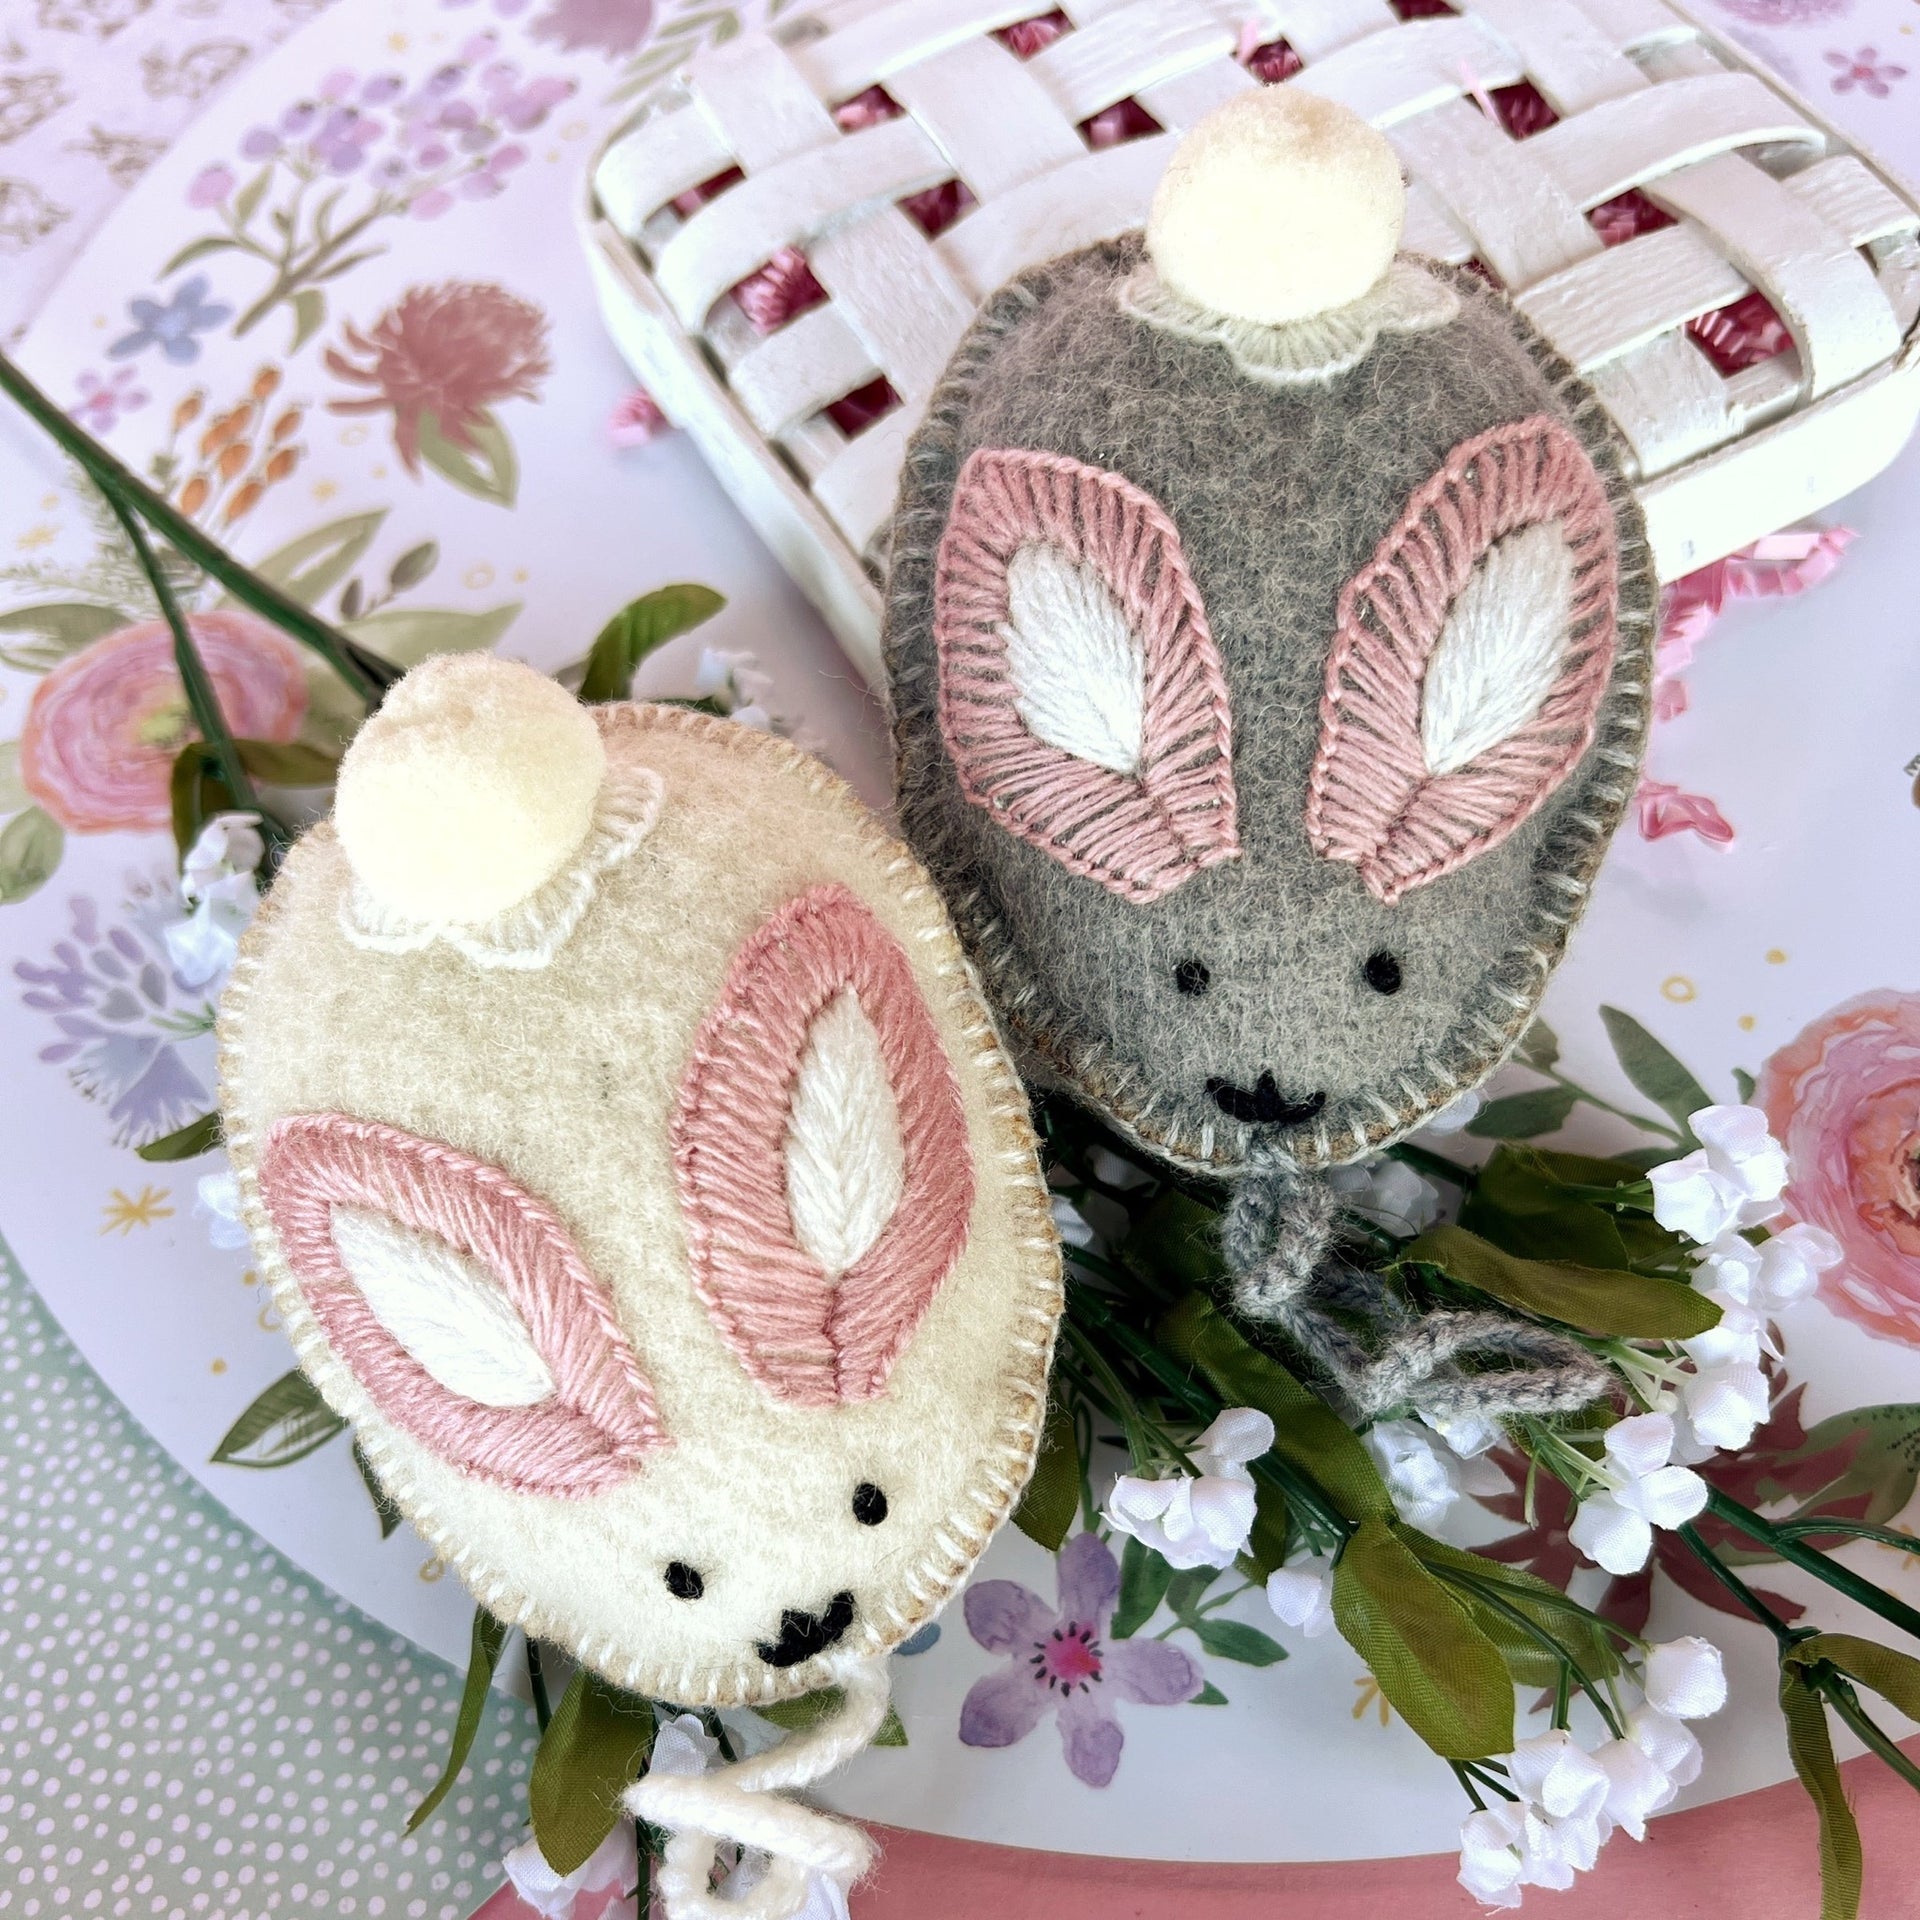 Gray and White Bunny Egg Easter Ornaments resting on flowers.